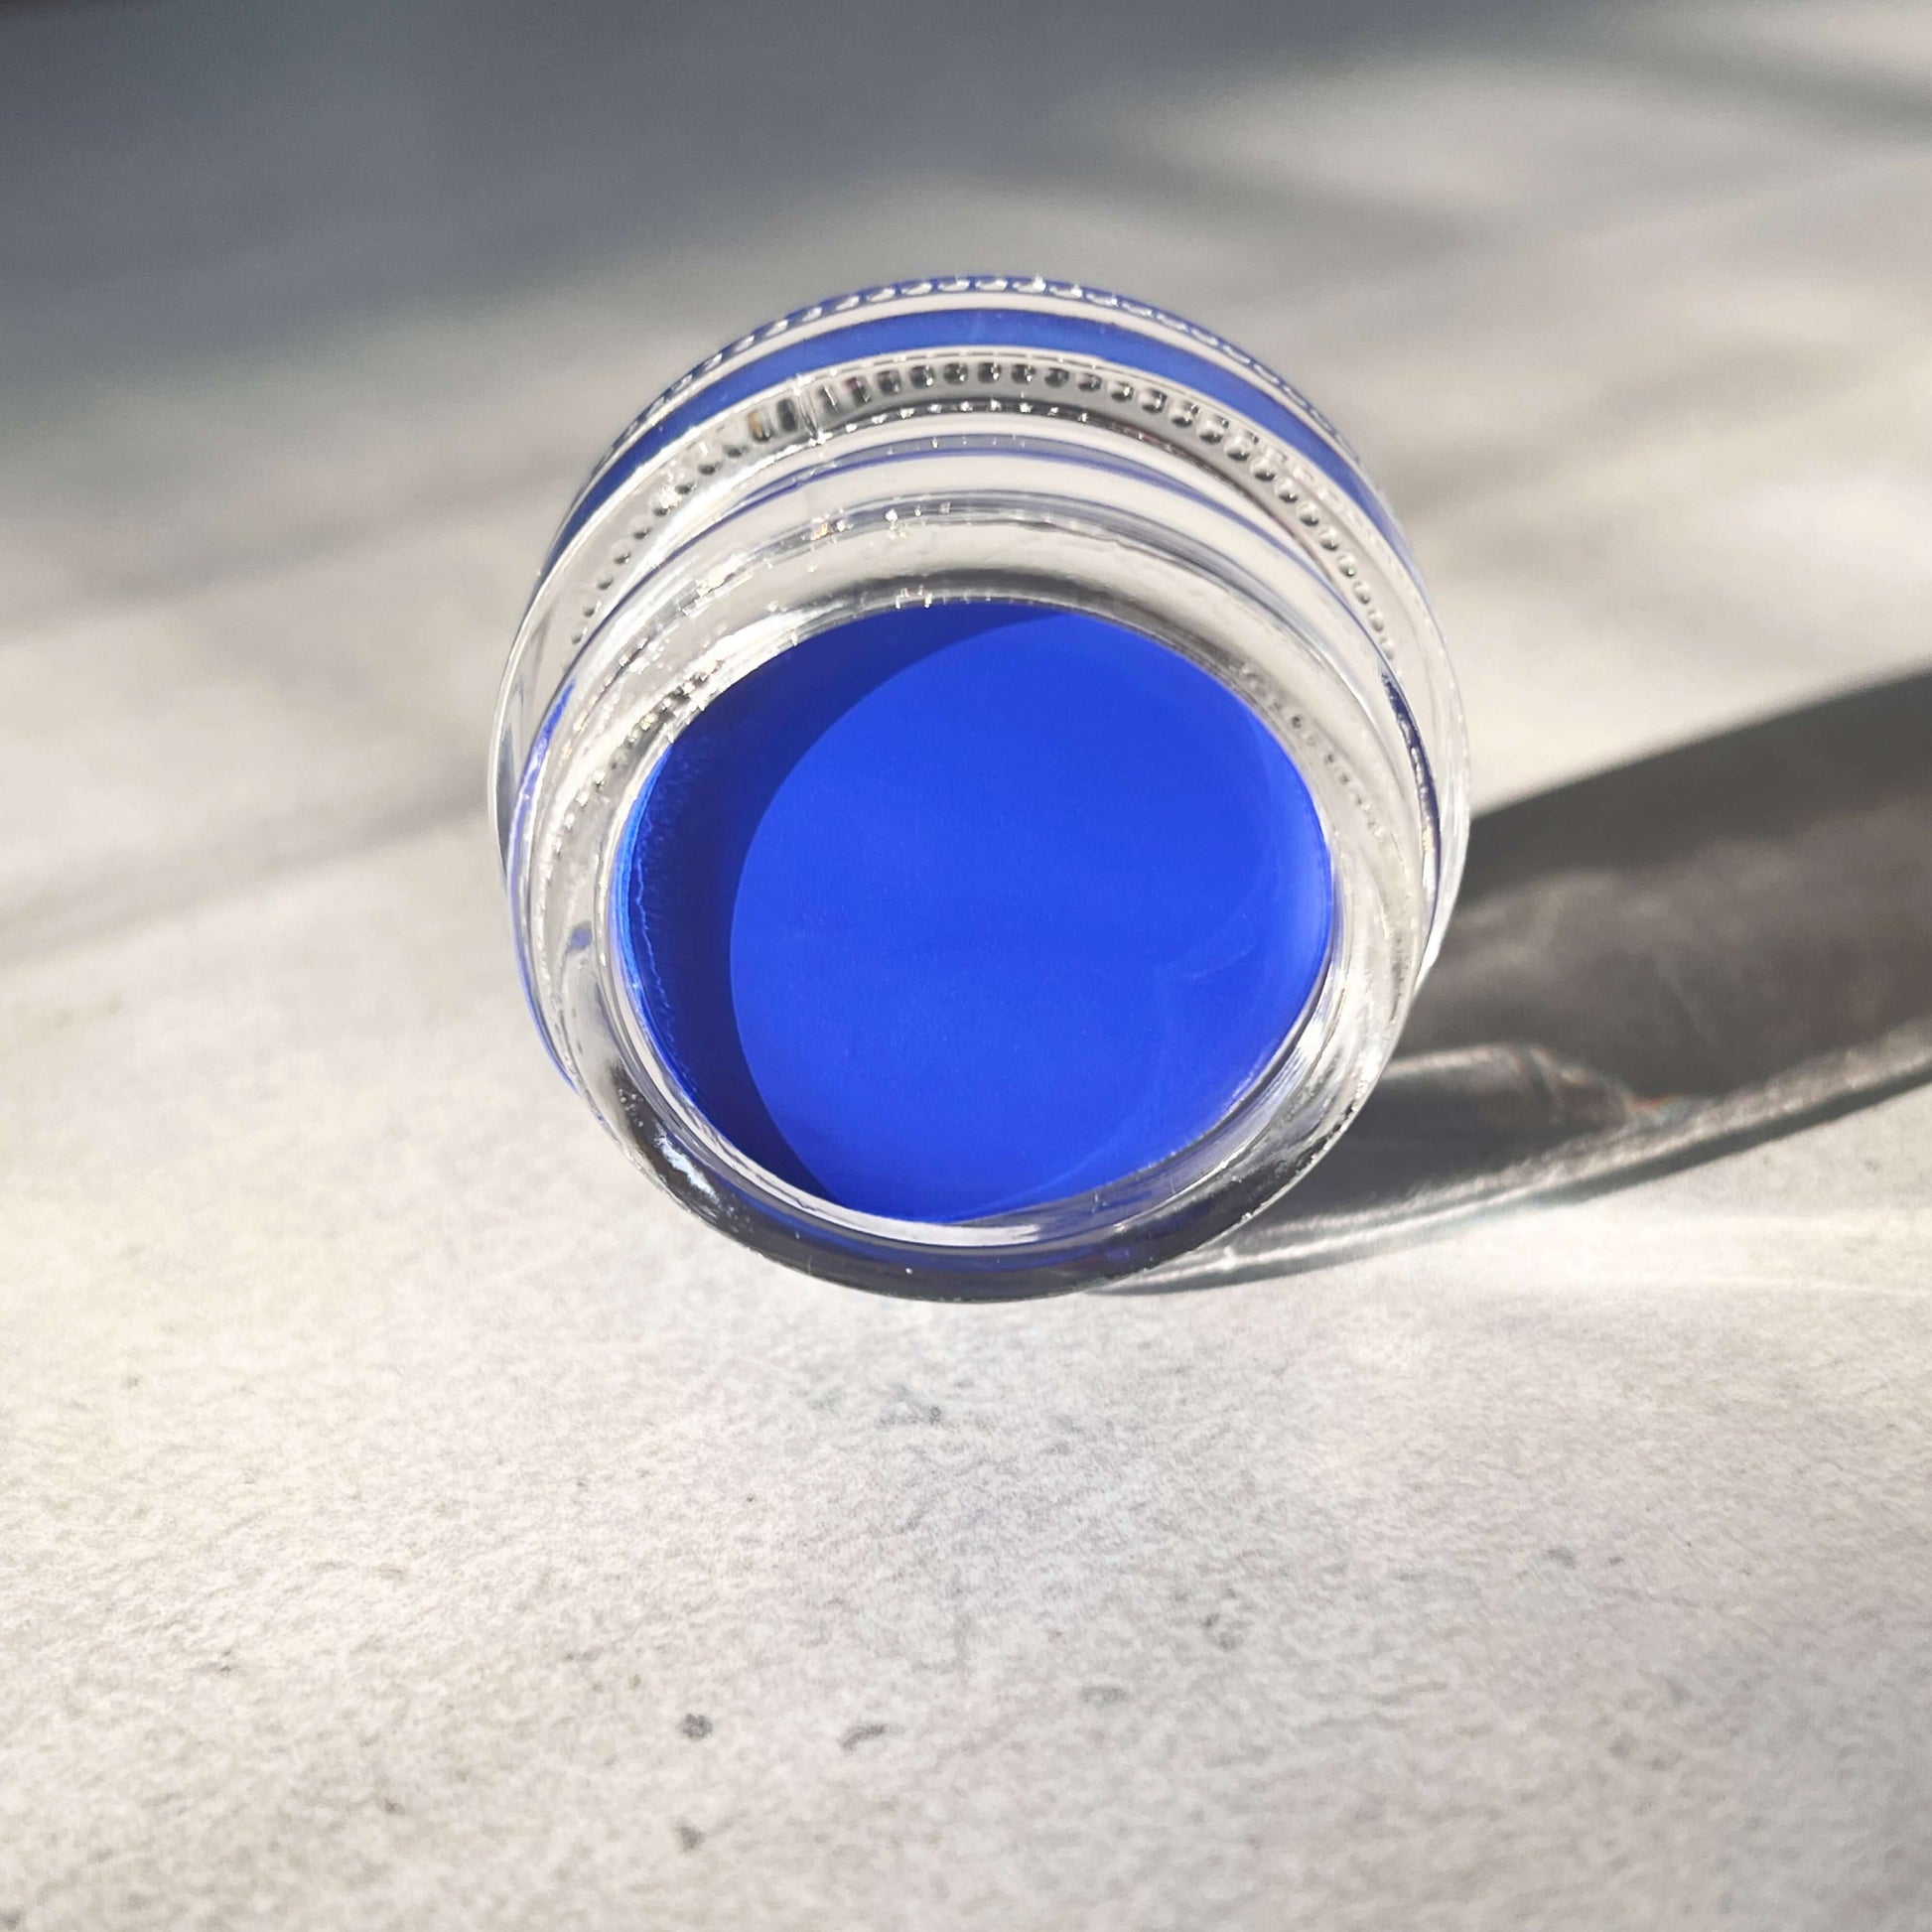 Royal Blue Eyeliner Gel lays on its side within Natural Sunlight.